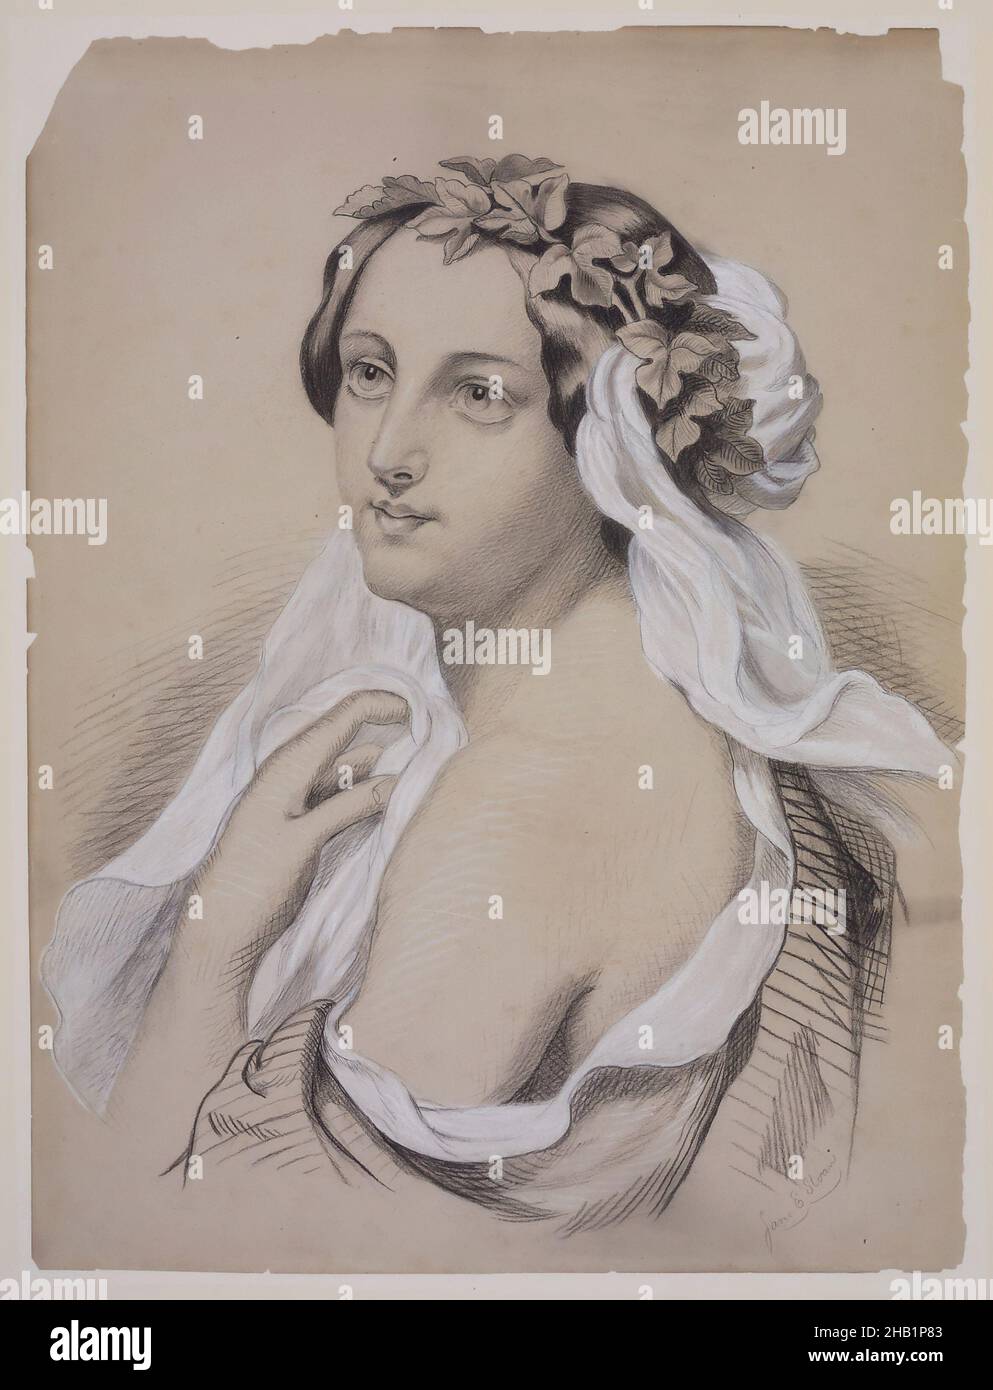 Portrait of a Woman Adorned with a Wreath of Leaves, Jane E. Sloan, White chalk and black media, probably oil pastel or conté over graphite on wove paper drymounted to a matboard backing, 19th century, Sheet: 18 x 13 1/2 in., 45.7 x 34.3 cm, 19th Century, beauty, female, flowing, gaze, head wreath, innocent, painting, portrait, shoulder, woman artist Stock Photo